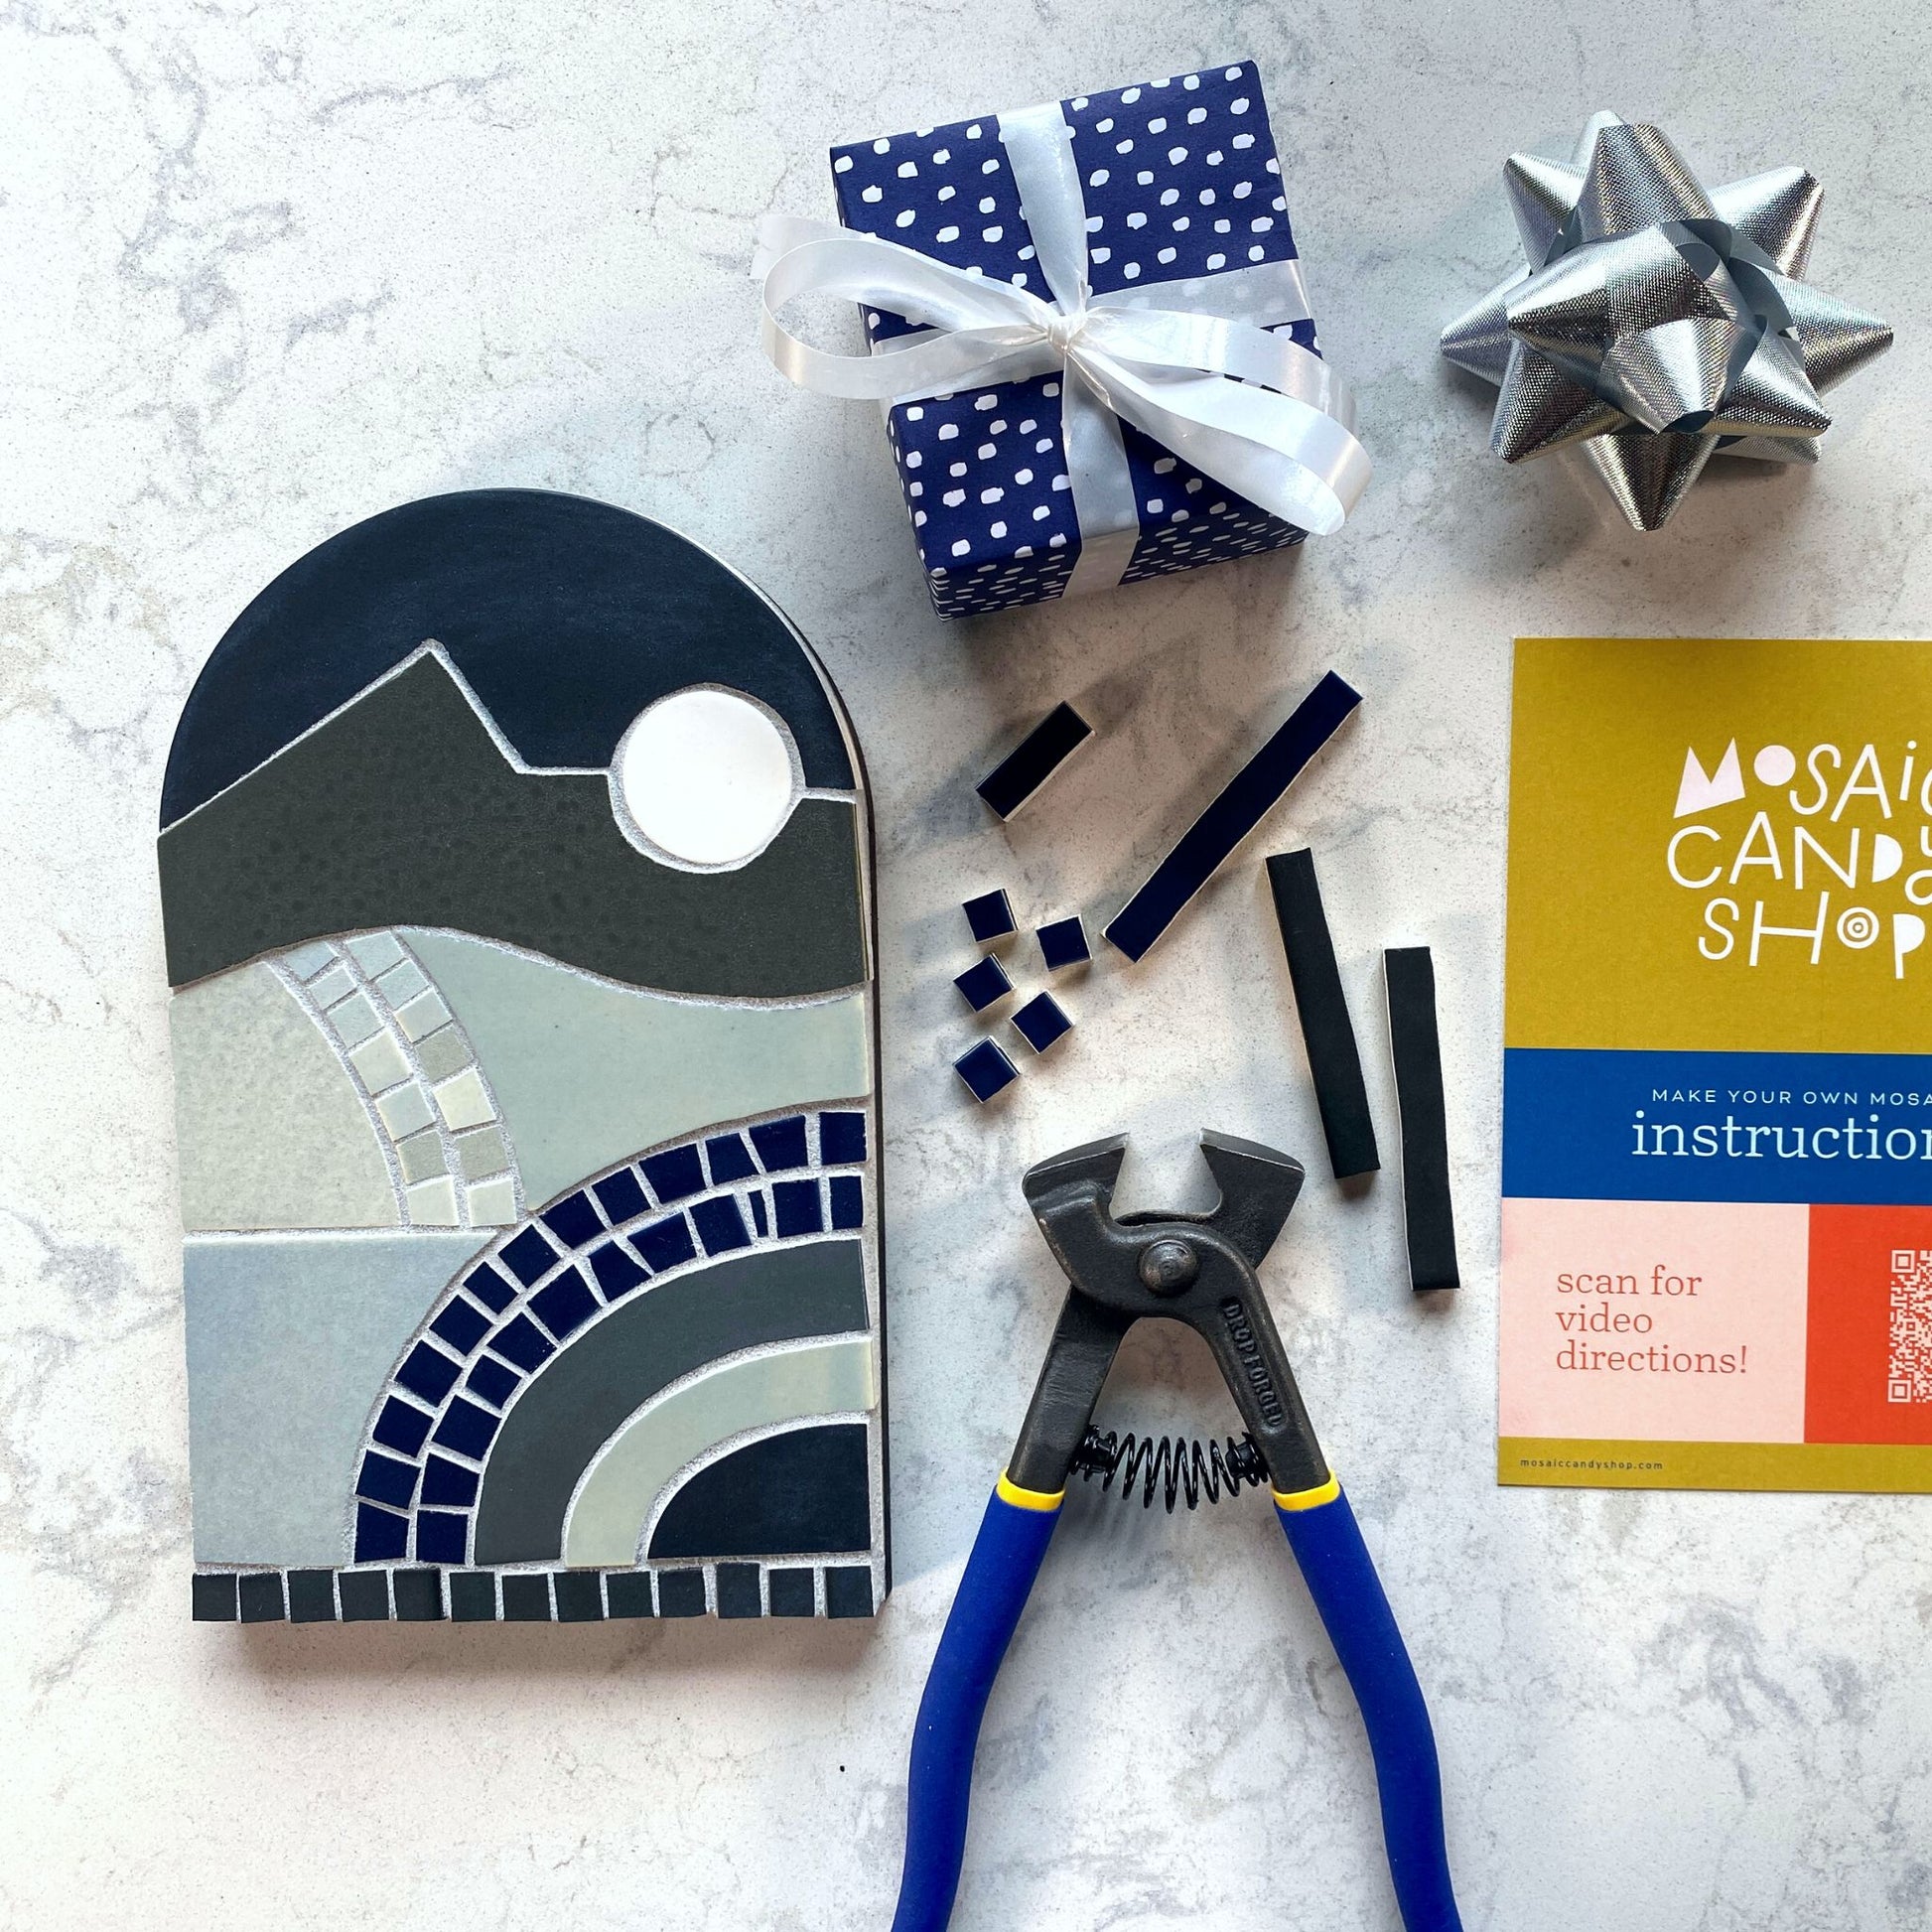 New Day - Nightfall mosaic kit with tile nippers and wrapped gift